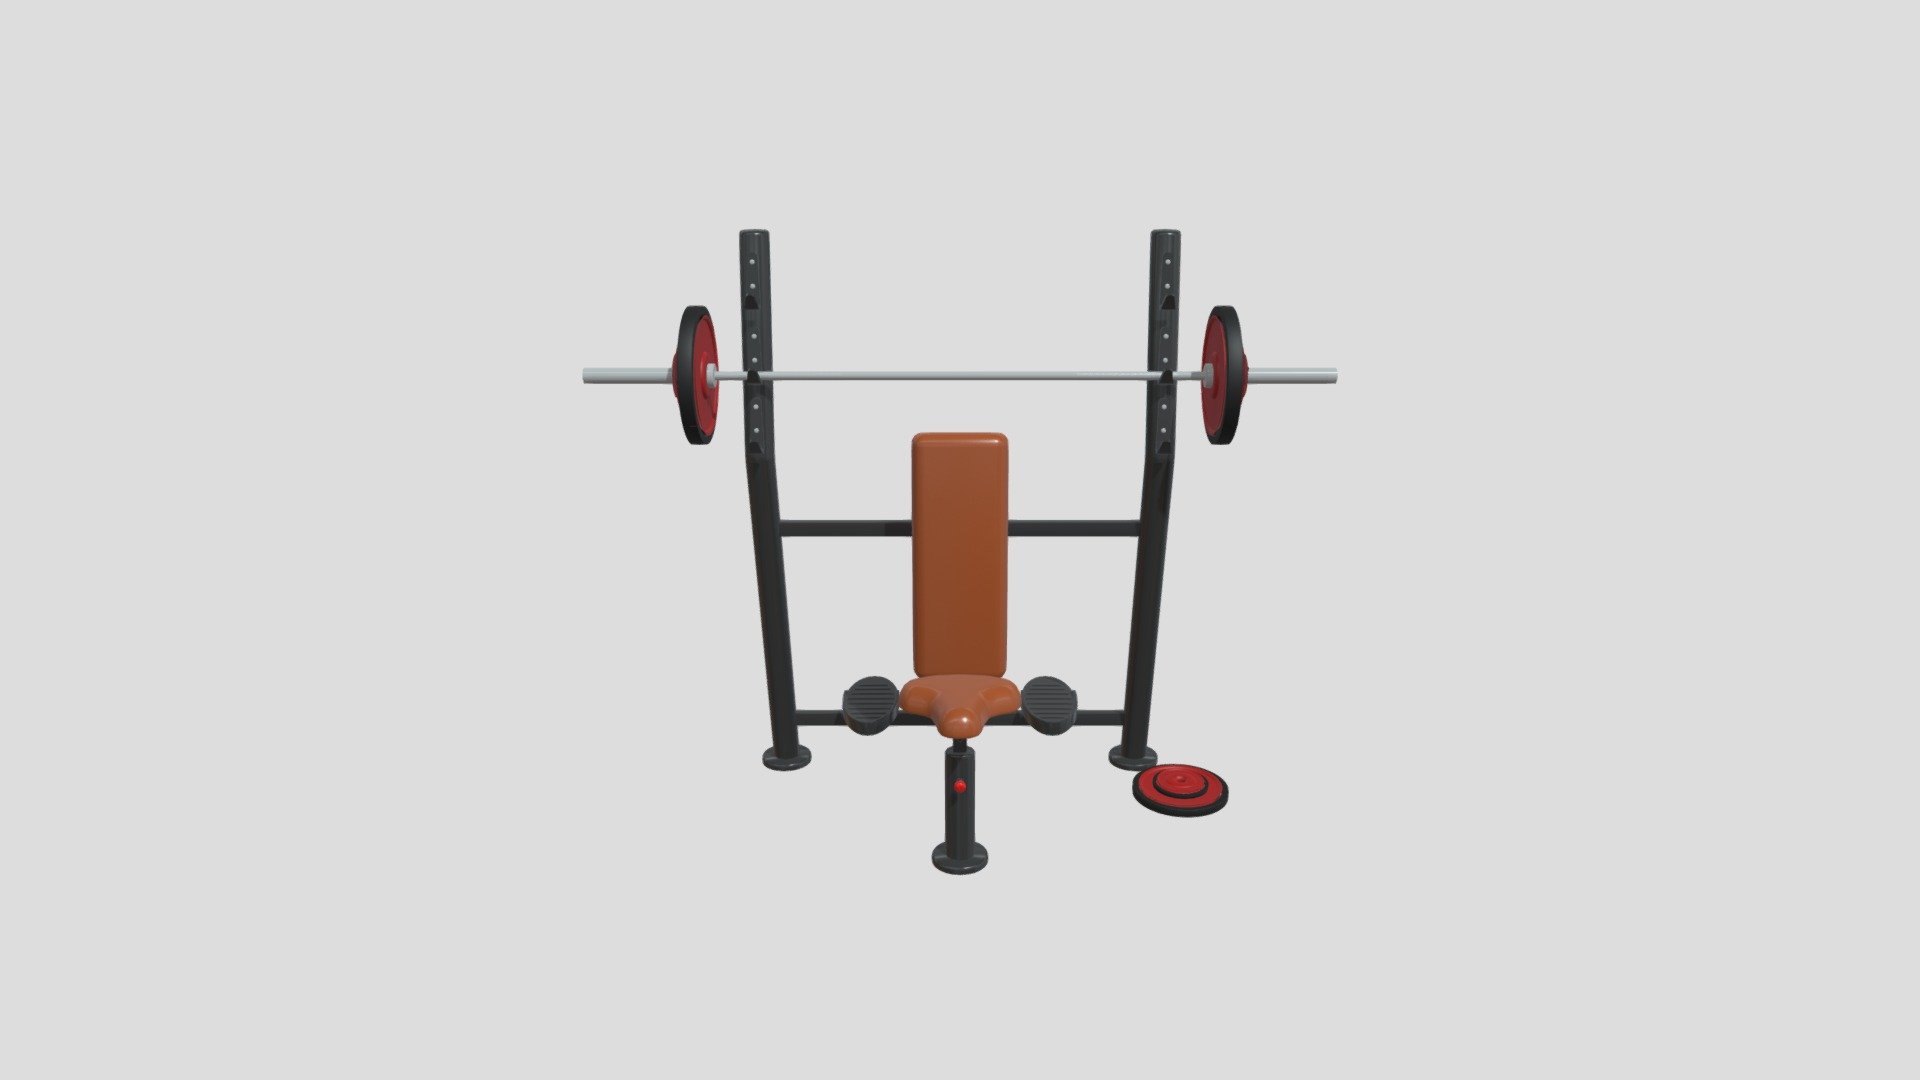 Gym machine 3d model built to real size, rendered with Cycles in Blender, as per seen on attached images. 

File formats:
-.blend, rendered with cycles, as seen in the images;
-.obj, with materials applied;
-.dae, with materials applied;
-.fbx, with materials applied;
-.stl;

Files come named appropriately and split by file format.

3D Software:
The 3D model was originally created in Blender 3.1 and rendered with Cycles.

Materials and textures:
The models have materials applied in all formats, and are ready to import and render.
Materials are image based using PBR, the model comes with four 4k png image textures for the rack, and four 1k textures for the disks.

Preview scenes:
The preview images are rendered in Blender using its built-in render engine &lsquo;Cycles'.
Note that the blend files come directly with the rendering scene included and the render command will generate the exact result as seen in previews.

General:
The models are built mostly out of quads.
The disks and bar are separate objects 3d model